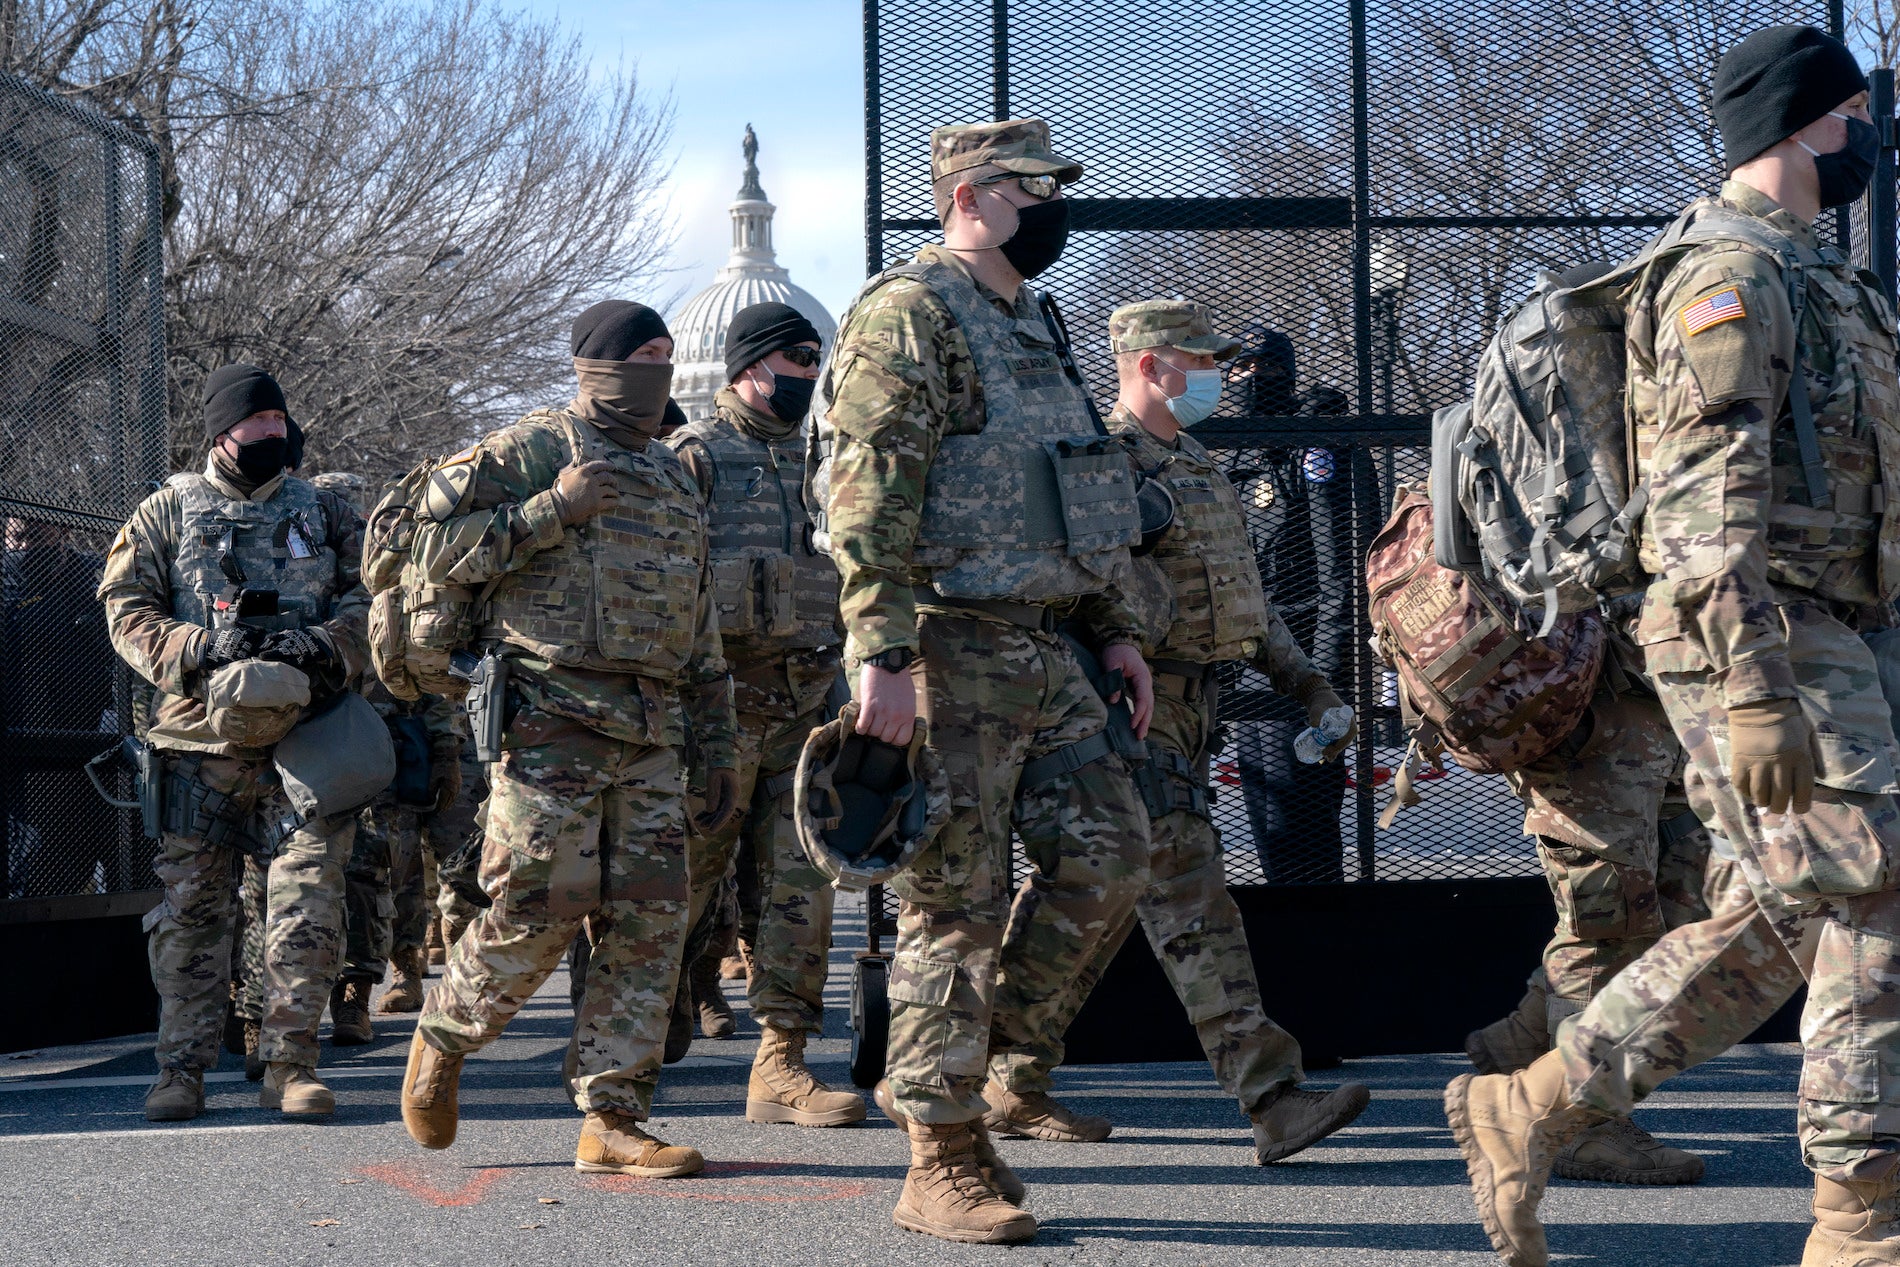 With the U.S. Capitol in the background, members of the National Guard change shifts as they exit through anti-scaling security fencing